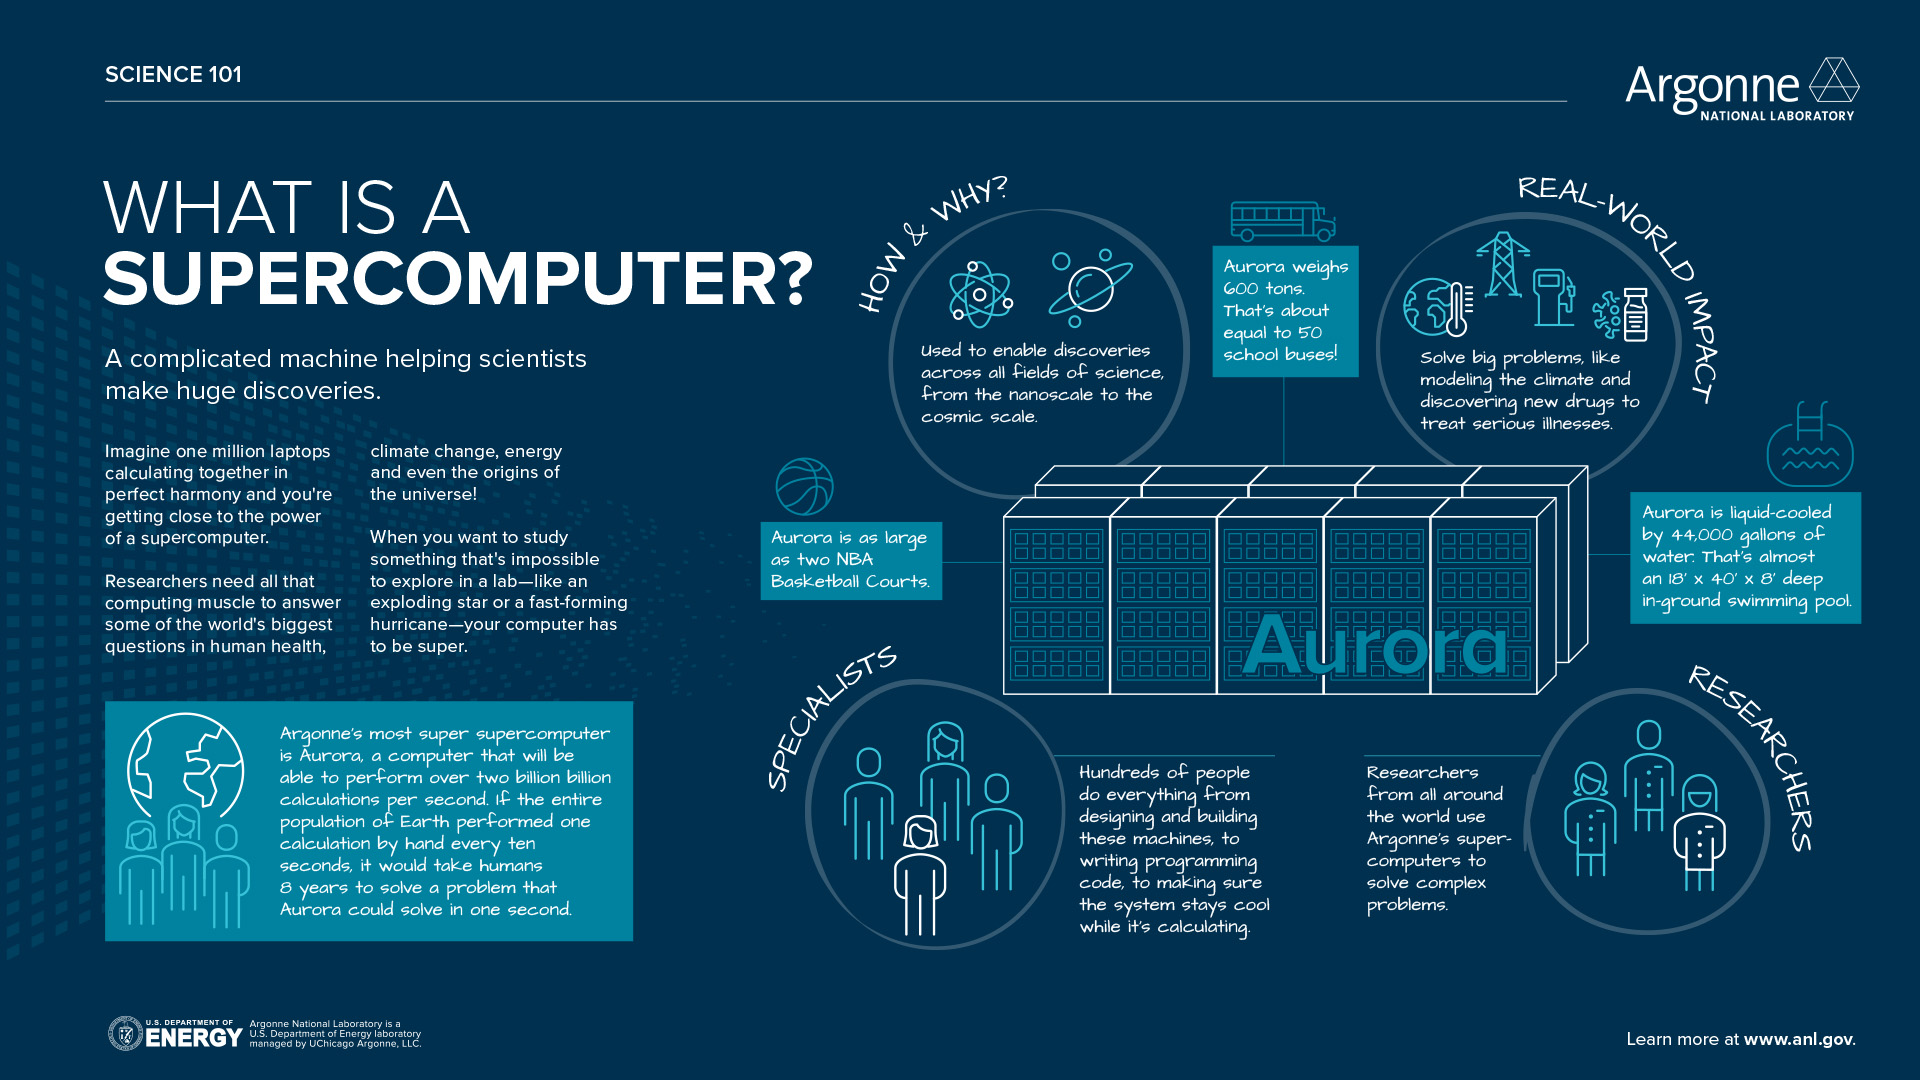 Science 101: What is Supercomputing?